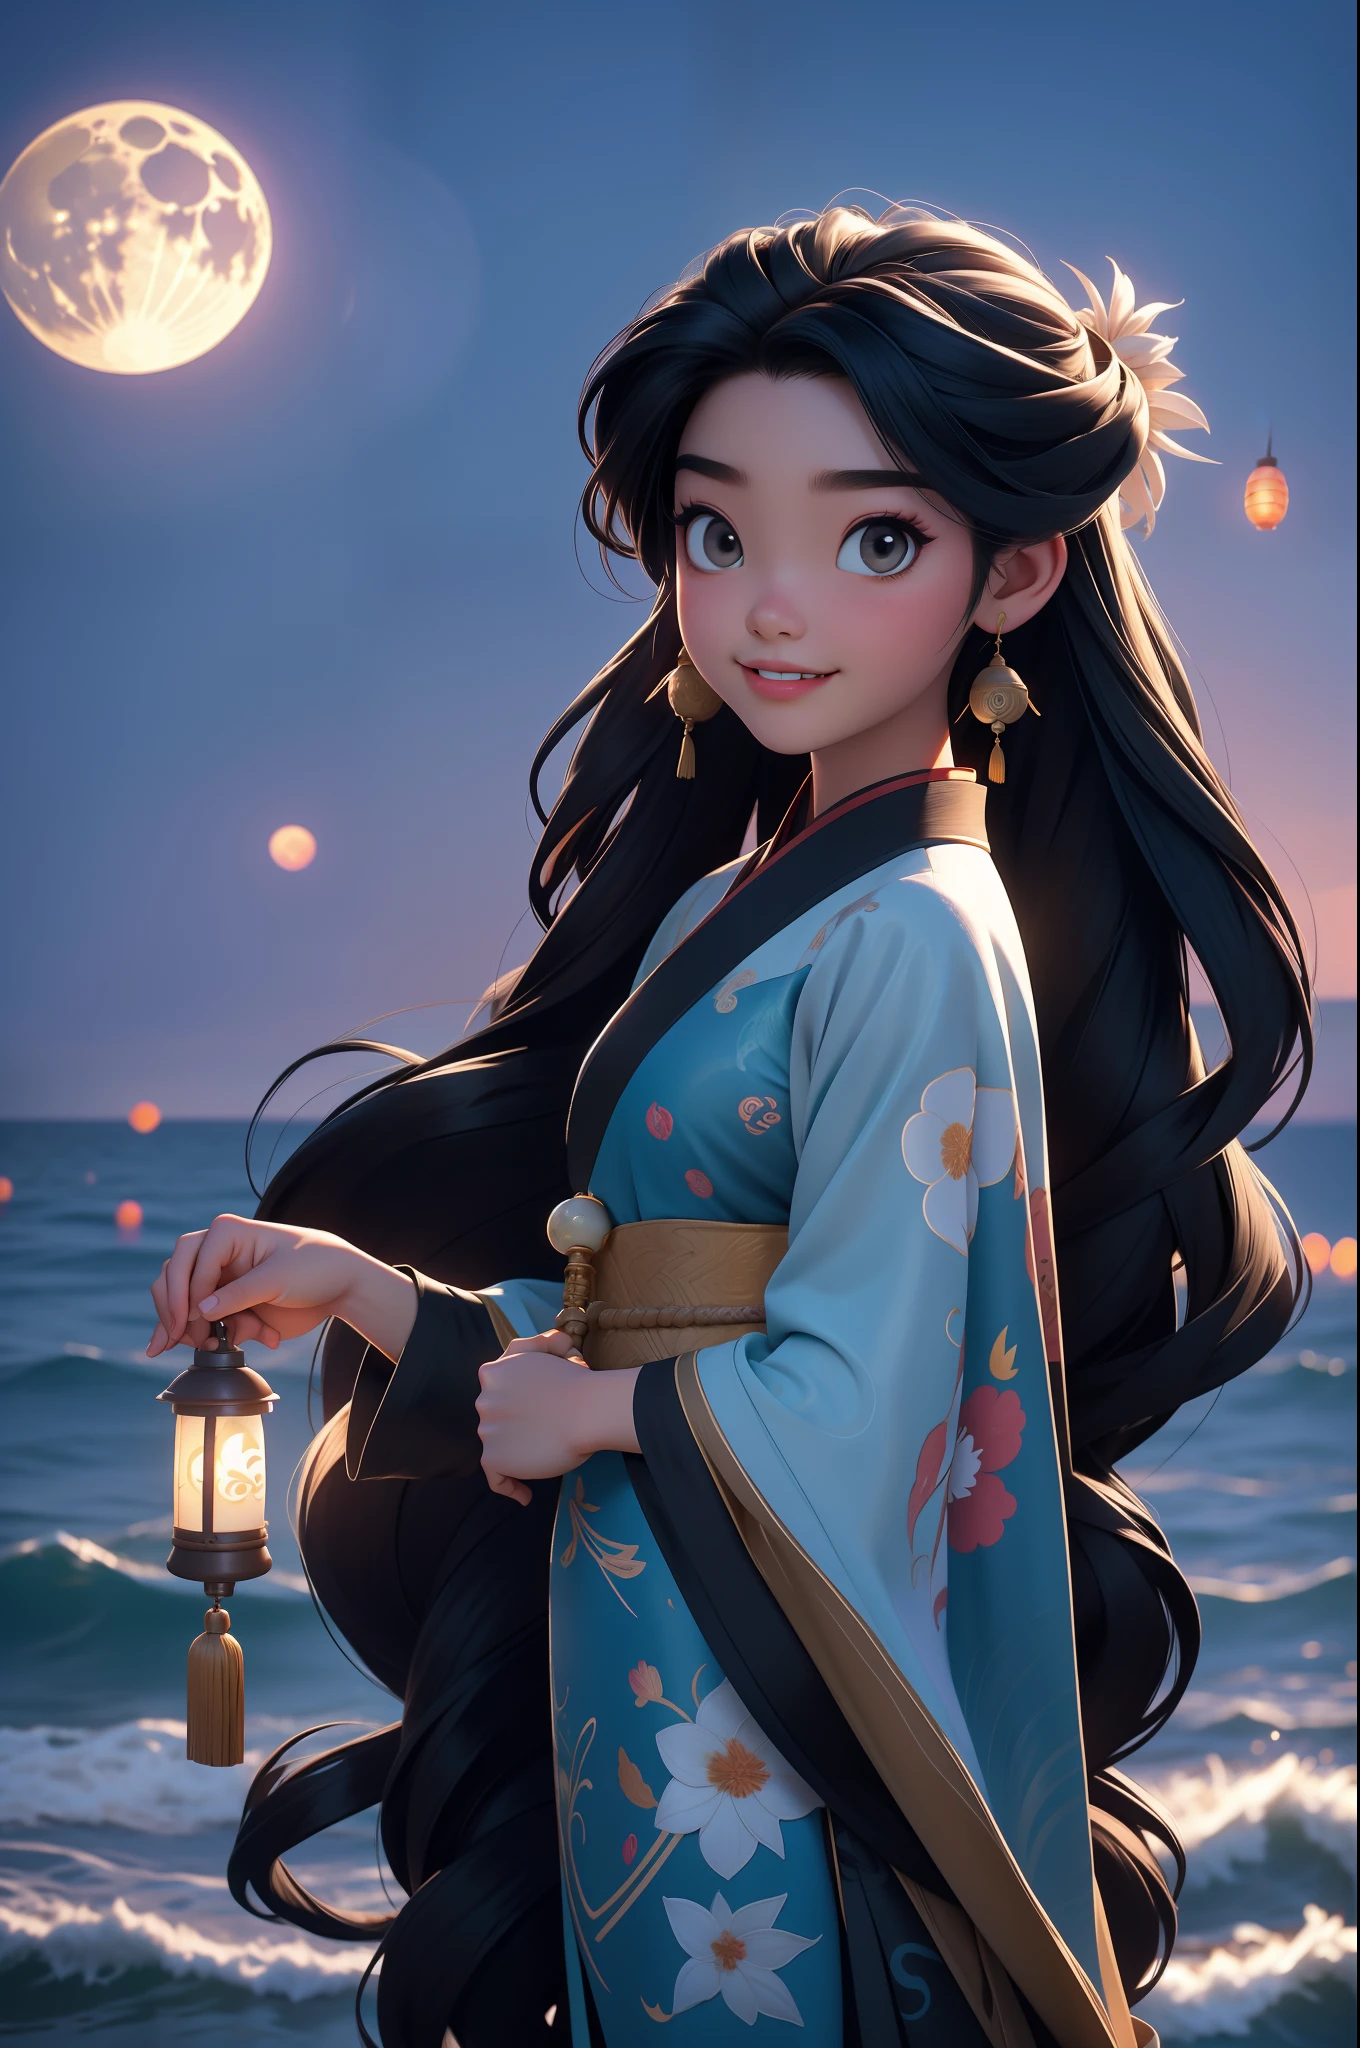 tmasterpiece, best qualityer, Seventeen-year-old girl, long whitr hair，Black color hair，Hanfu，Relax on the beach，ssmile，The full moon gradually rises from sea level，the night，the ocean，calm seas，inverted image，coconut palms，（（There are many lanterns floating in the sky））, pixar-style，Disney  style，Chinese style